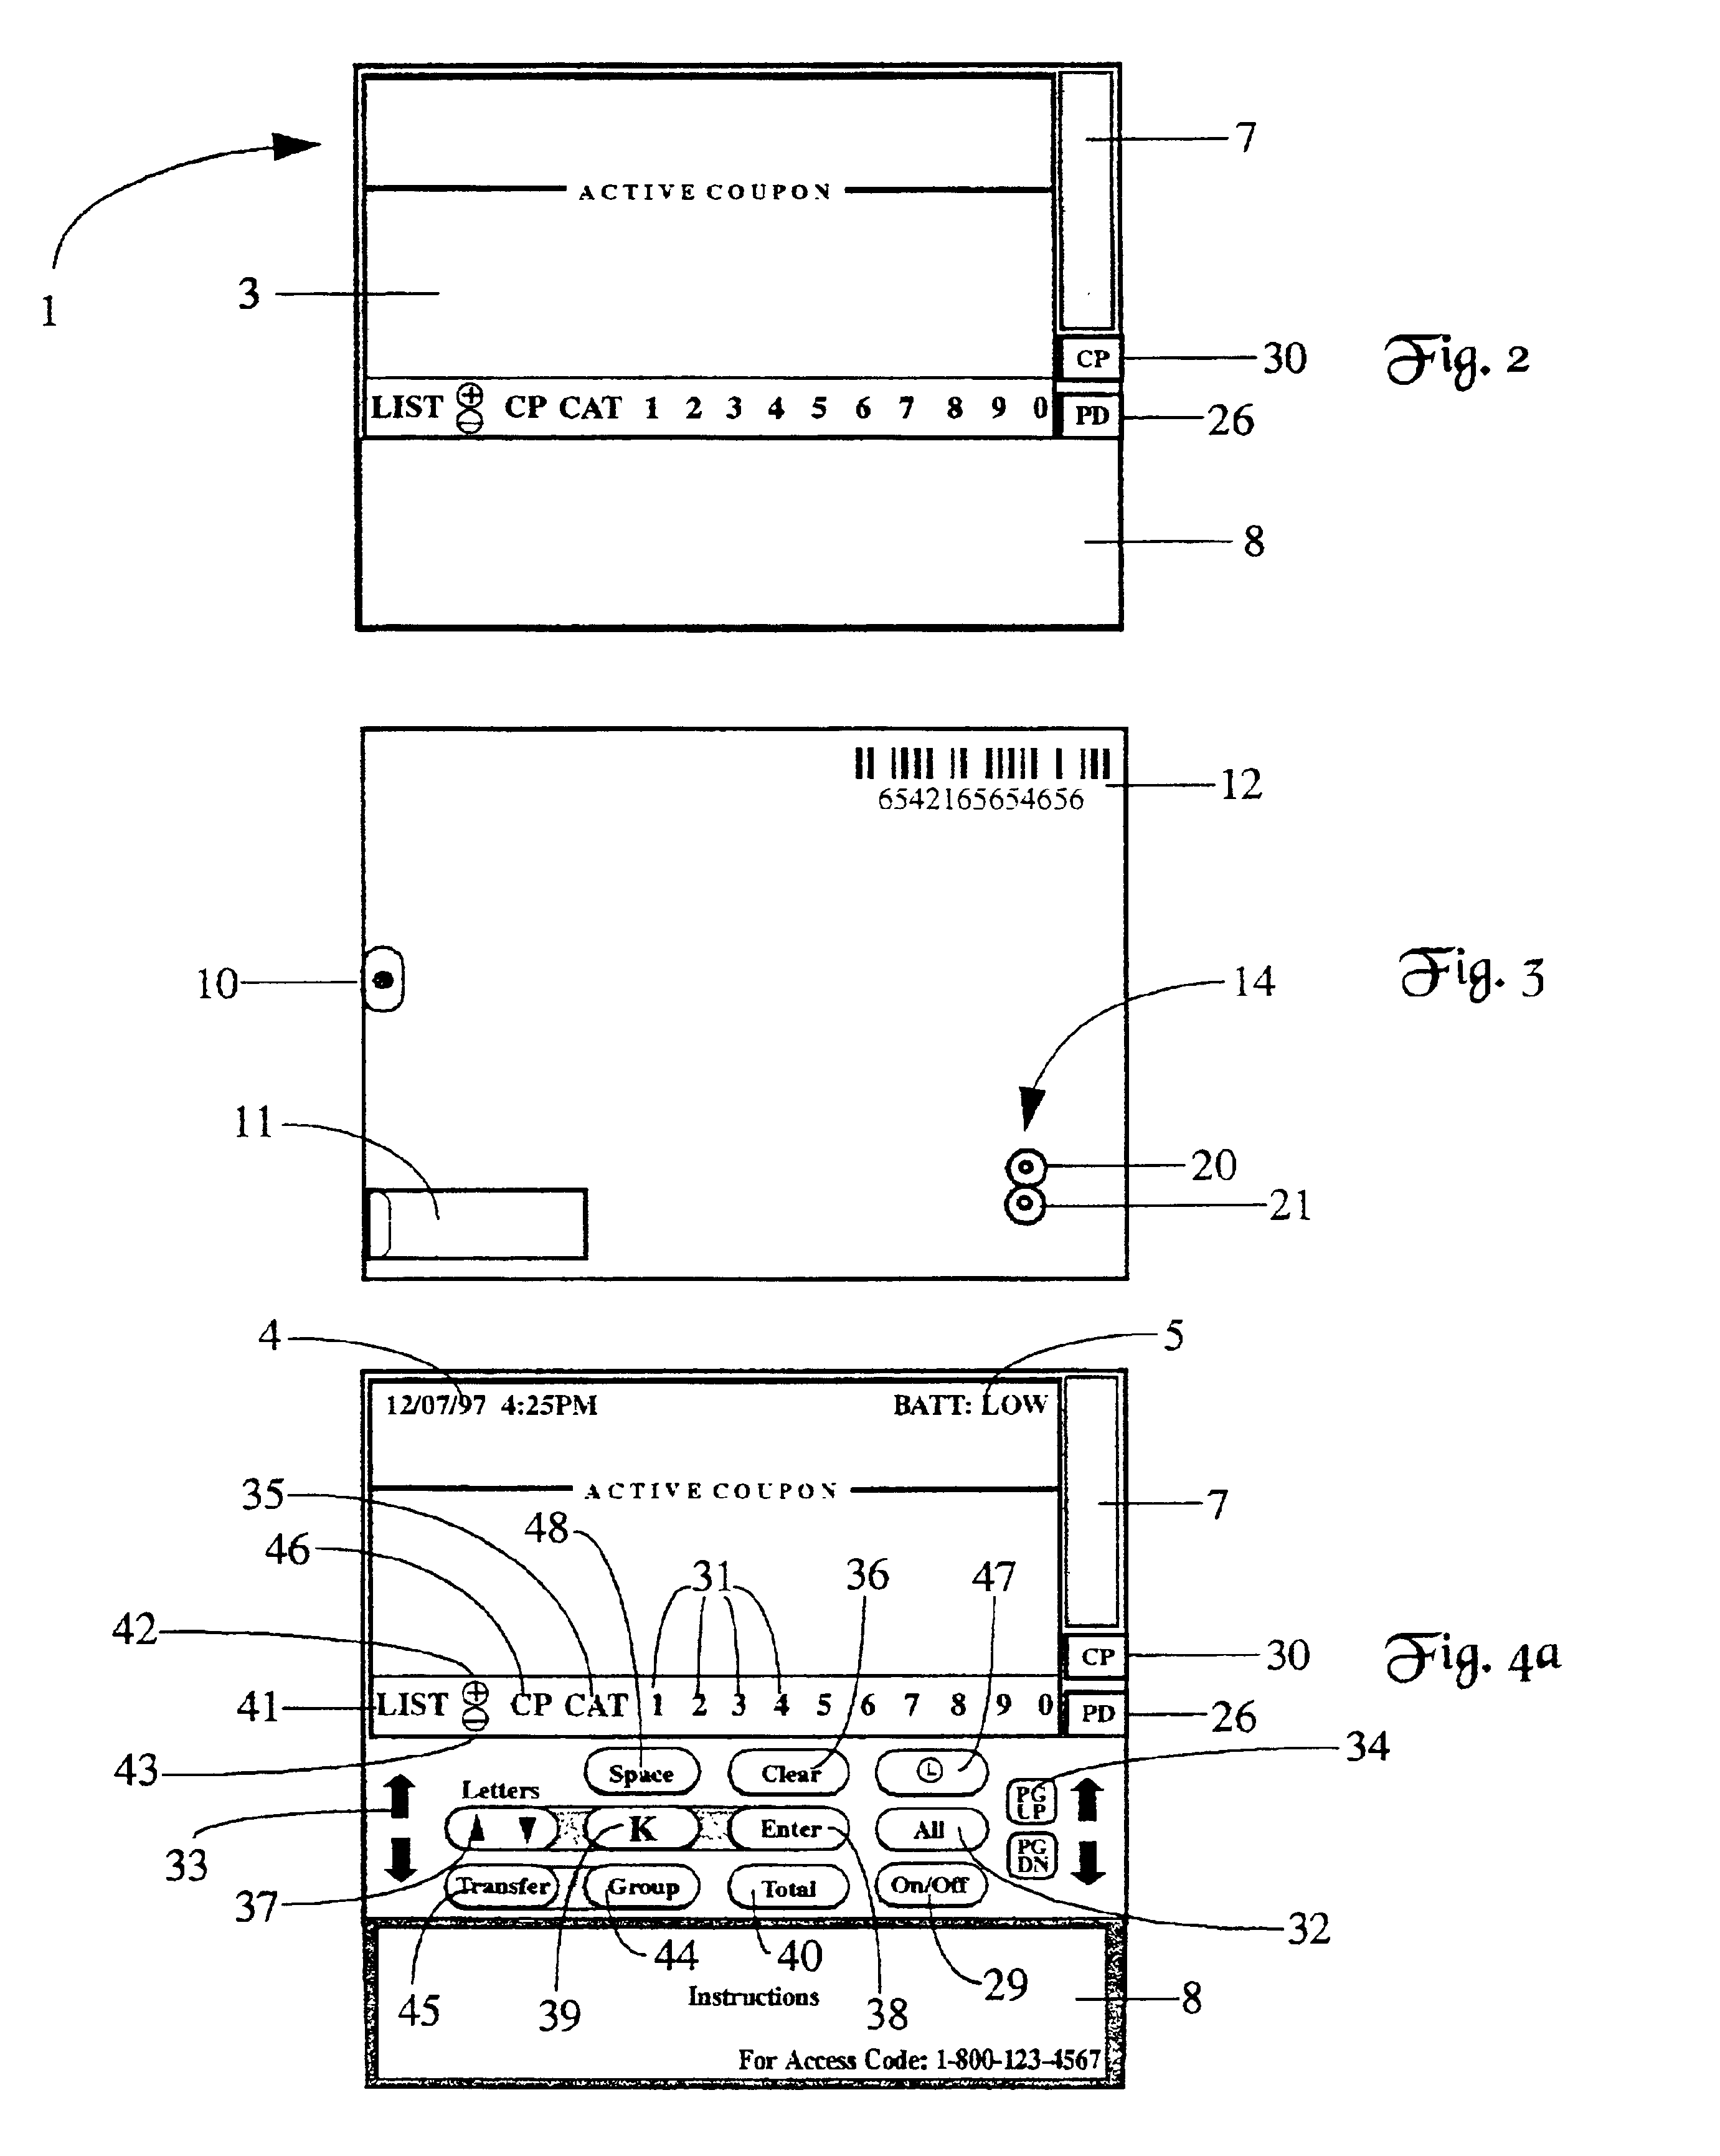 Method and apparatus for coupon management and redemption